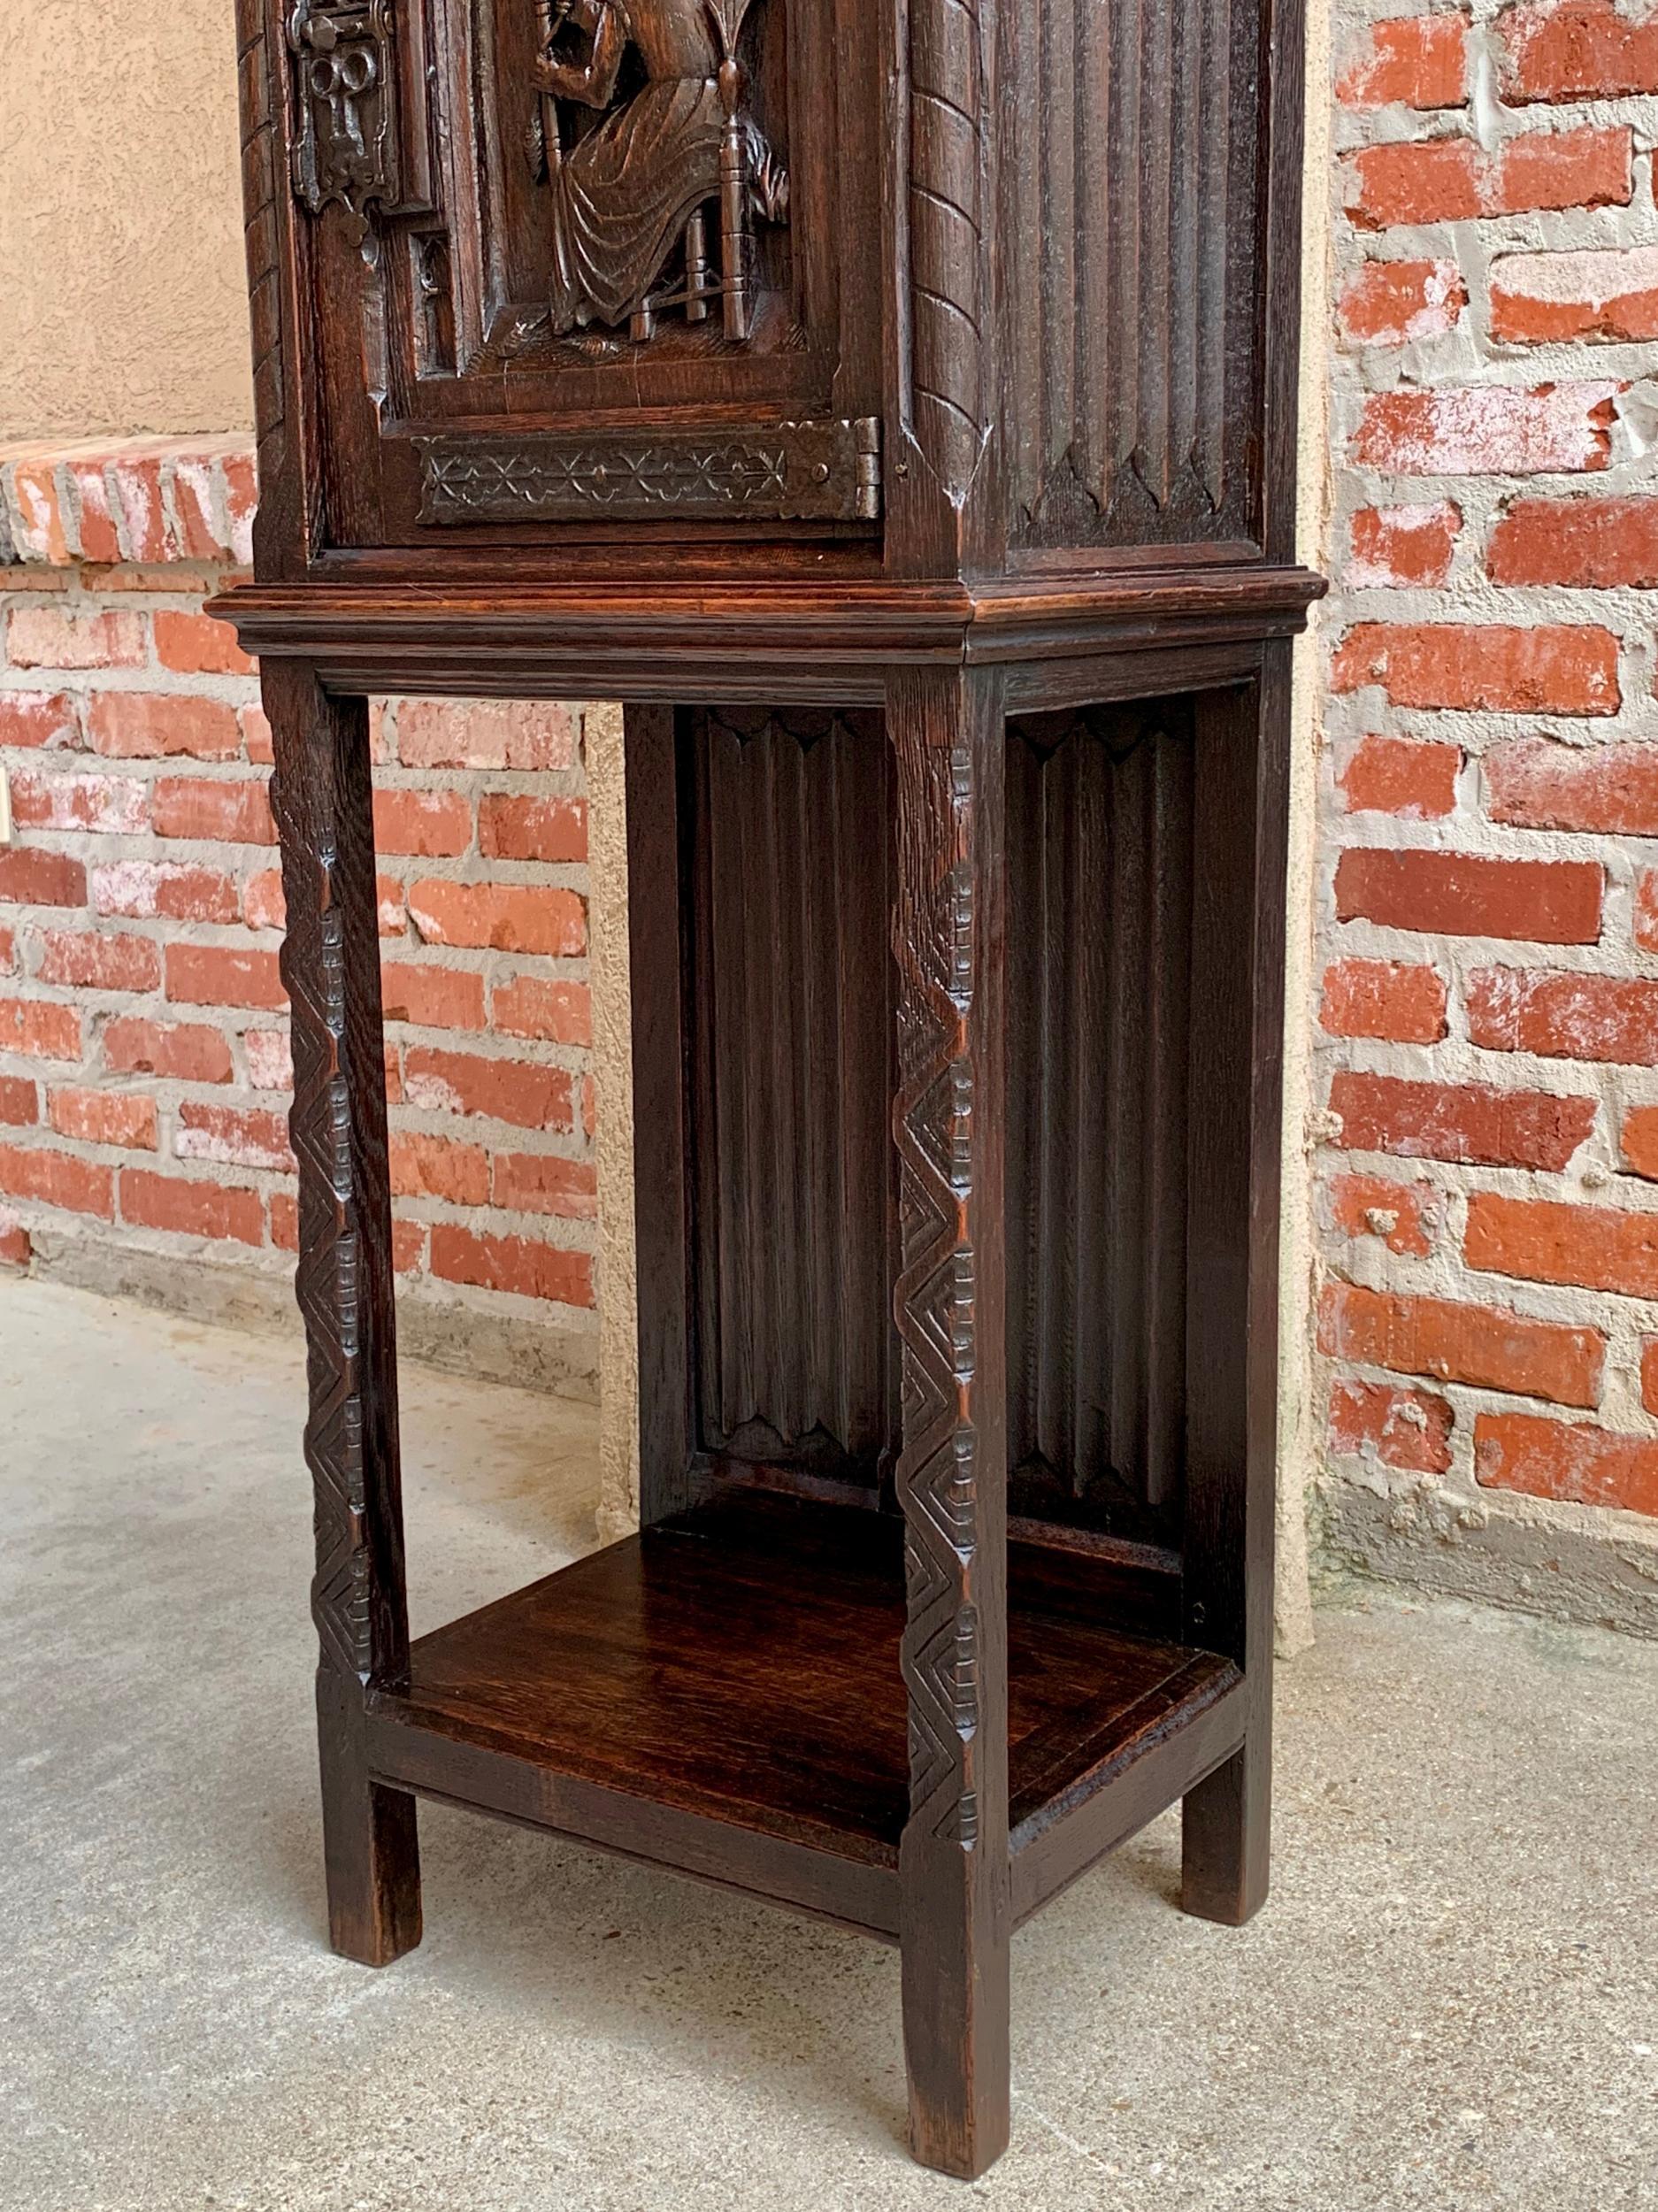 Metal Petite Antique French Carved Oak Gothic Vestment Cabinet Display Bookcase 19th C For Sale